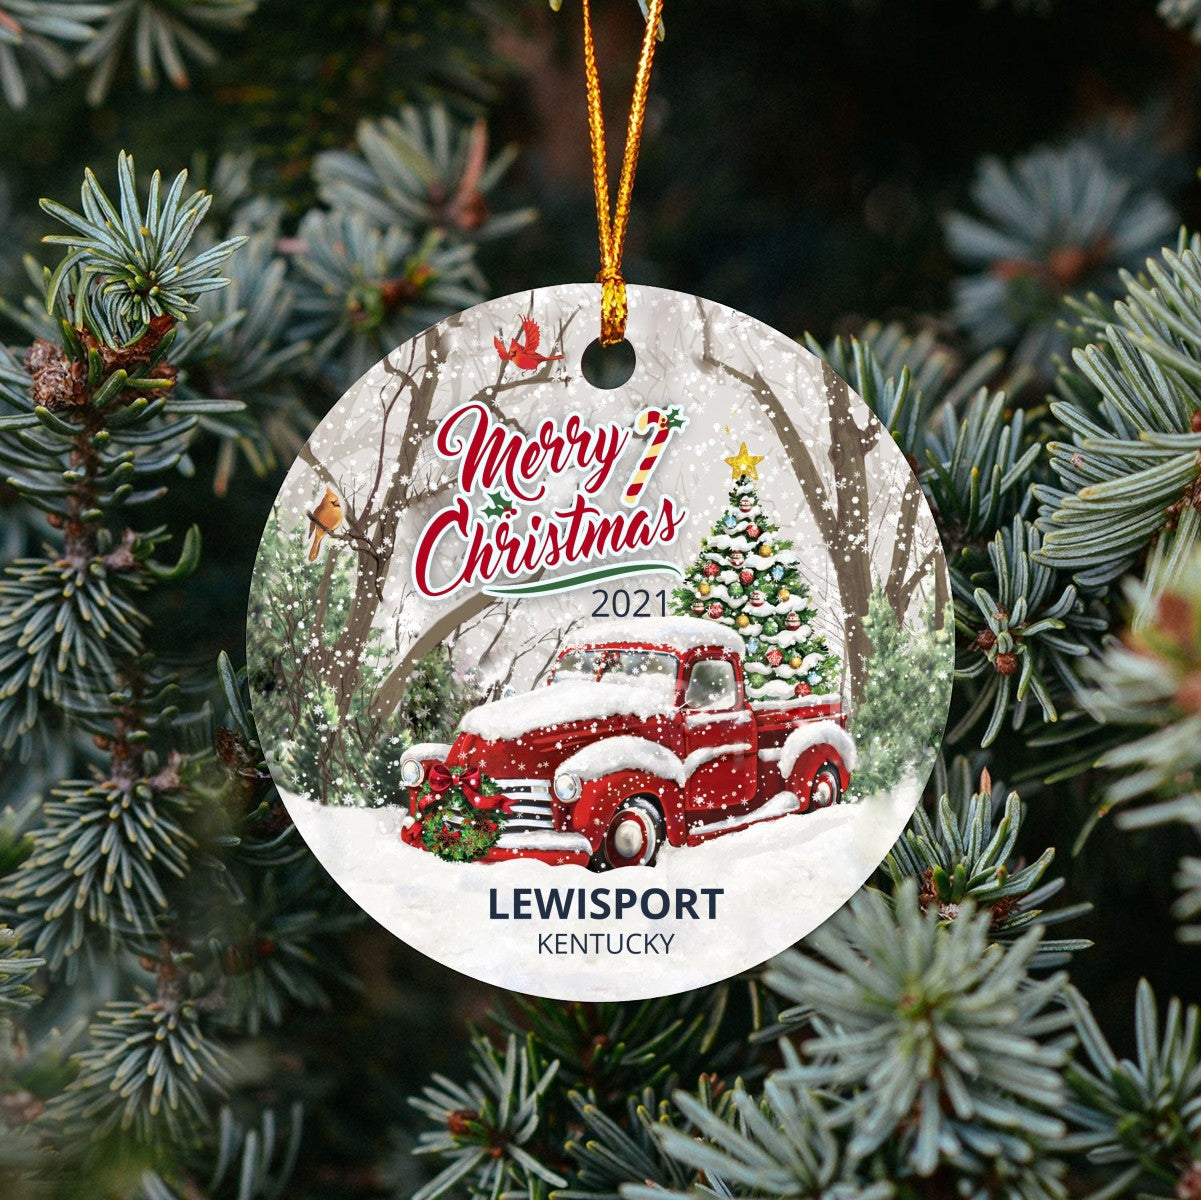 Christmas Tree Ornaments Lewisport - Ornament With Name City, State Lewisport Kentucky KY Ornament - Red Truck Xmas Ornaments 3'' Plastic Gift For Family, Friend And Housewarming